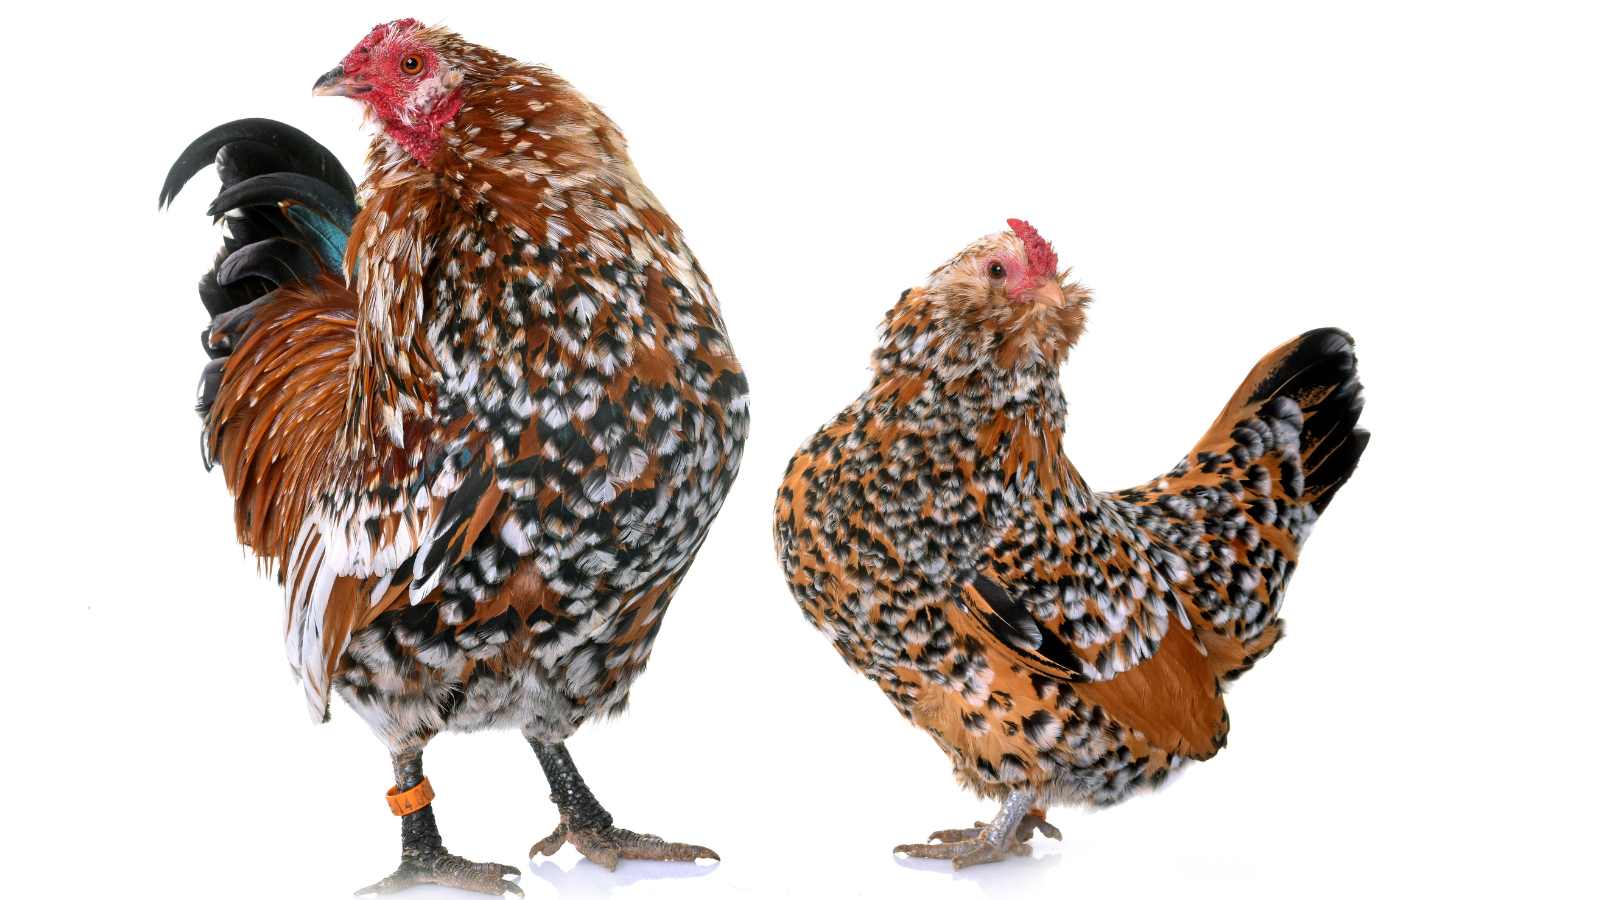 A Barbu d'Anvers hen and rooster pair. Their feather coloring is brown, black, and white.